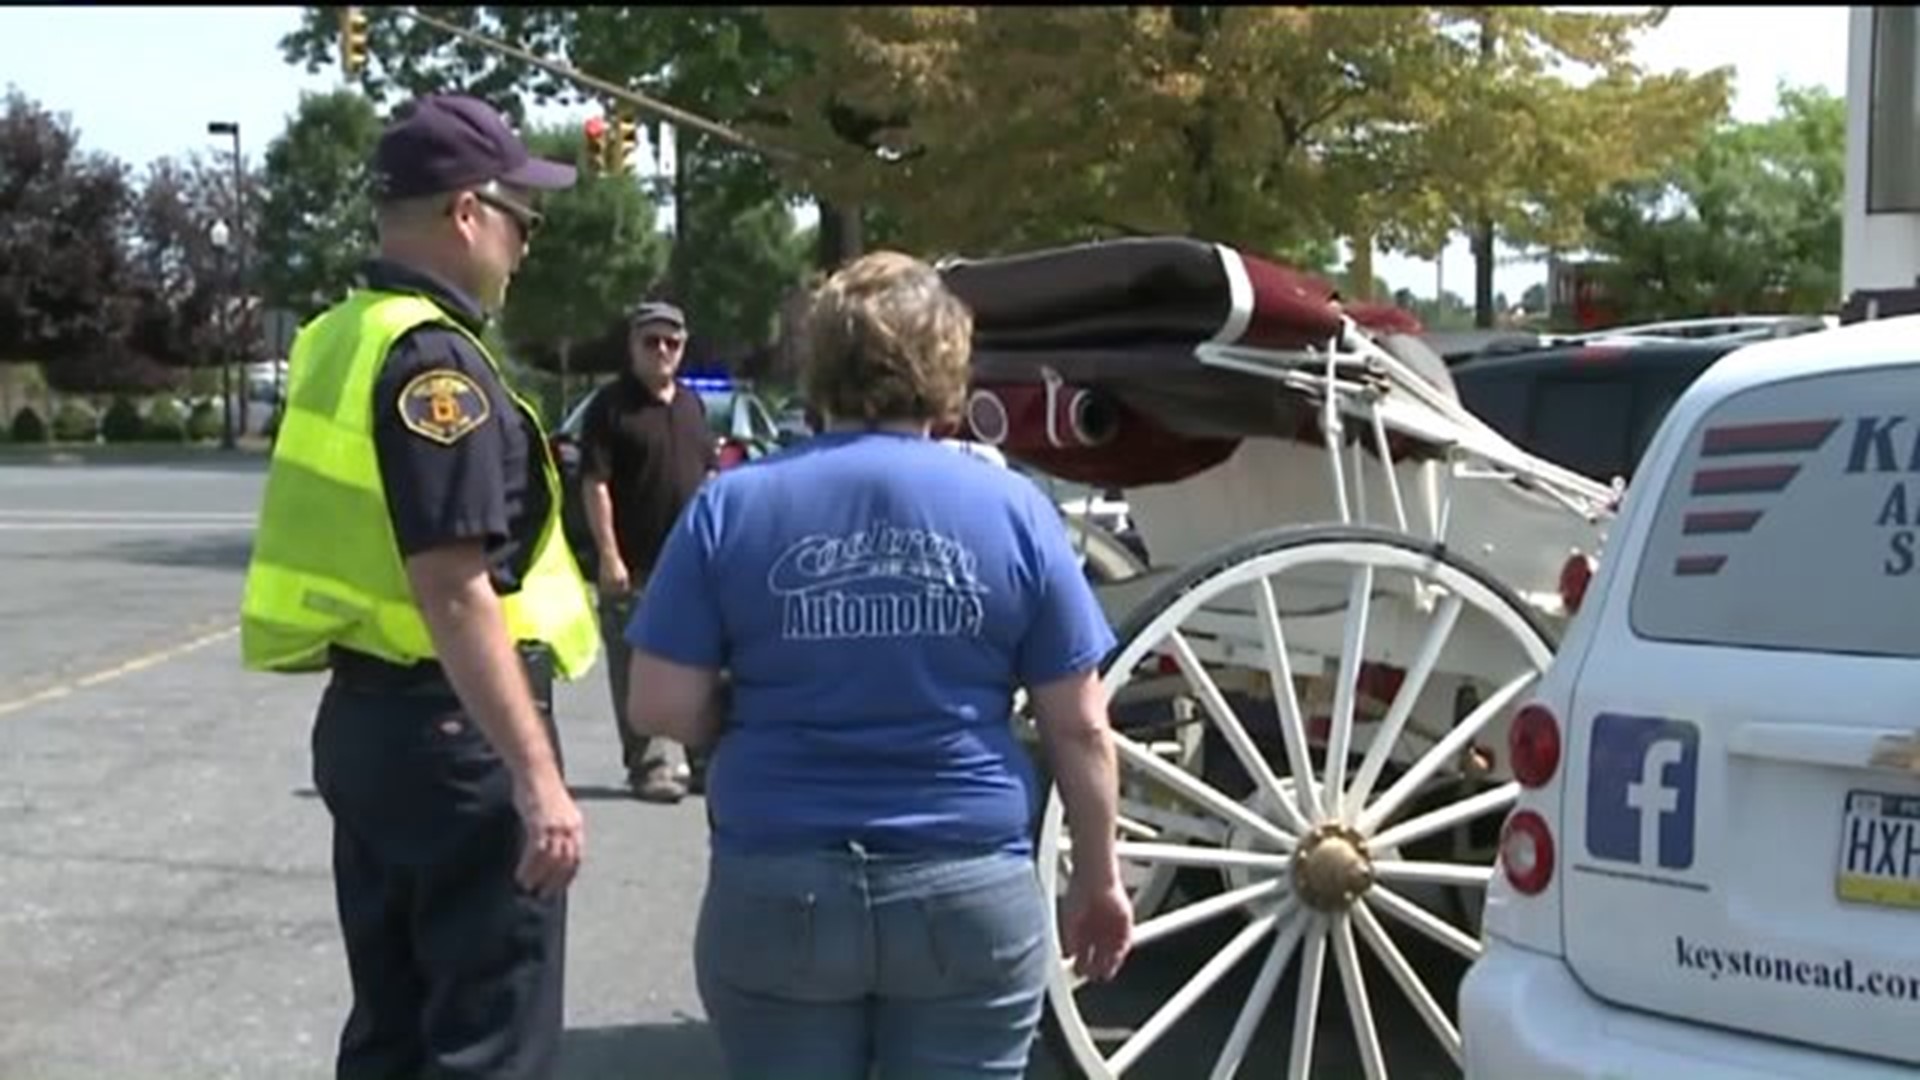 Horse-Drawn Carriage Crashes in Williamsport